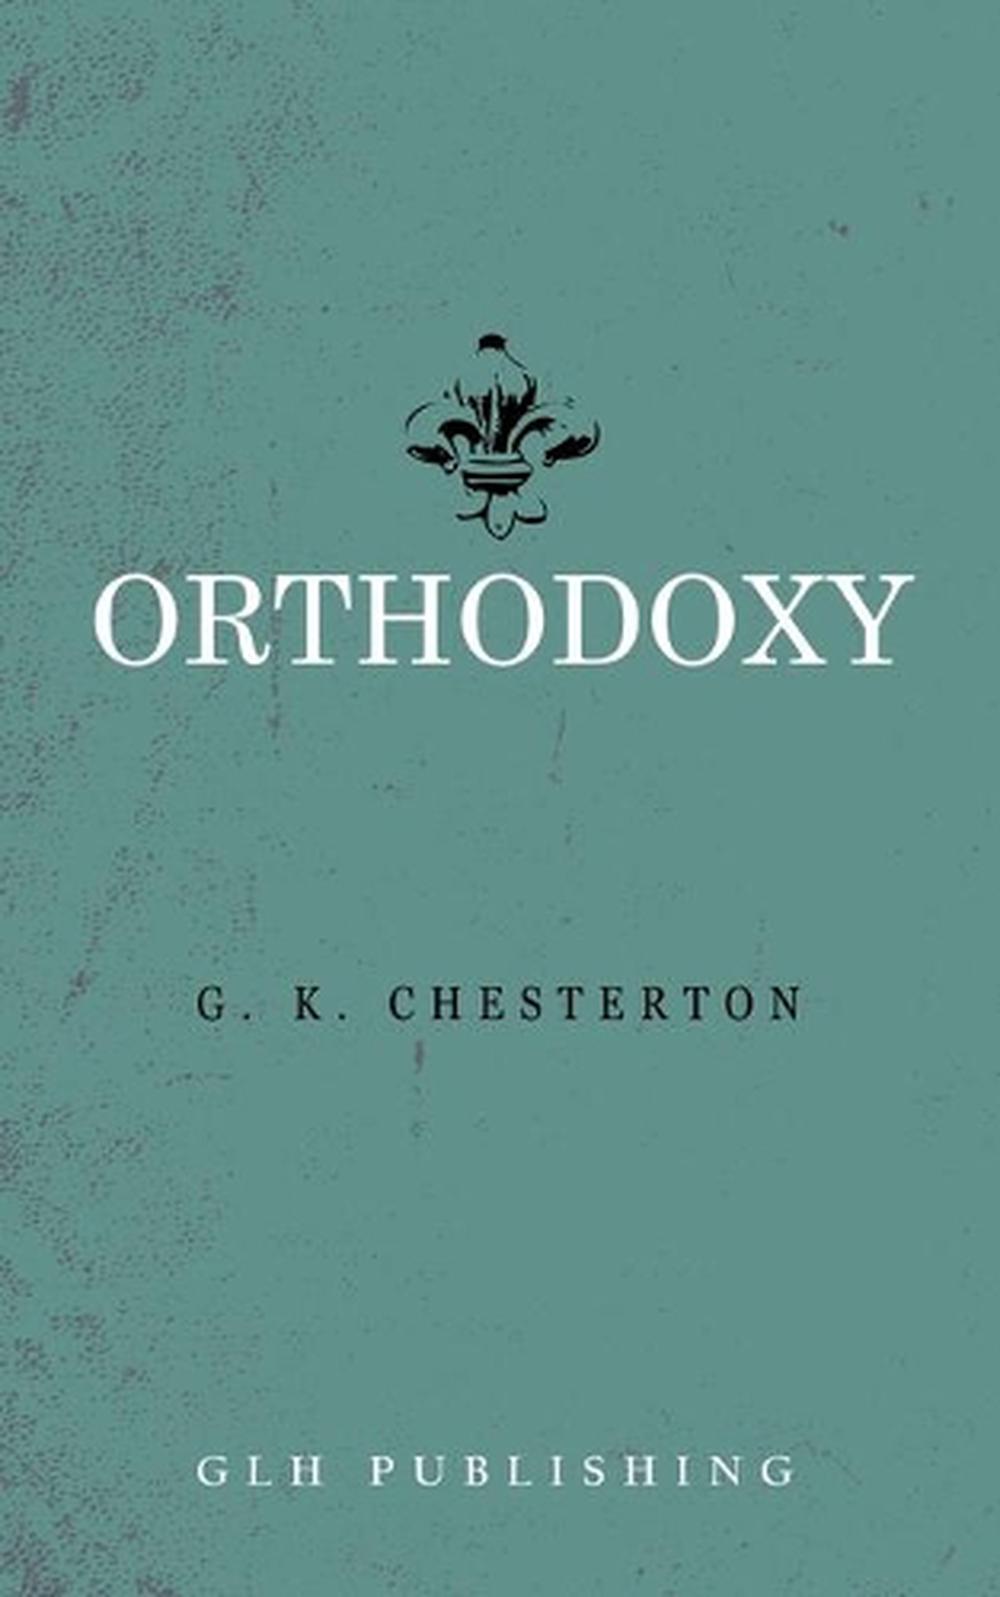 Orthodoxy by G.K. Chesterton (English) Paperback Book Free Shipping ...